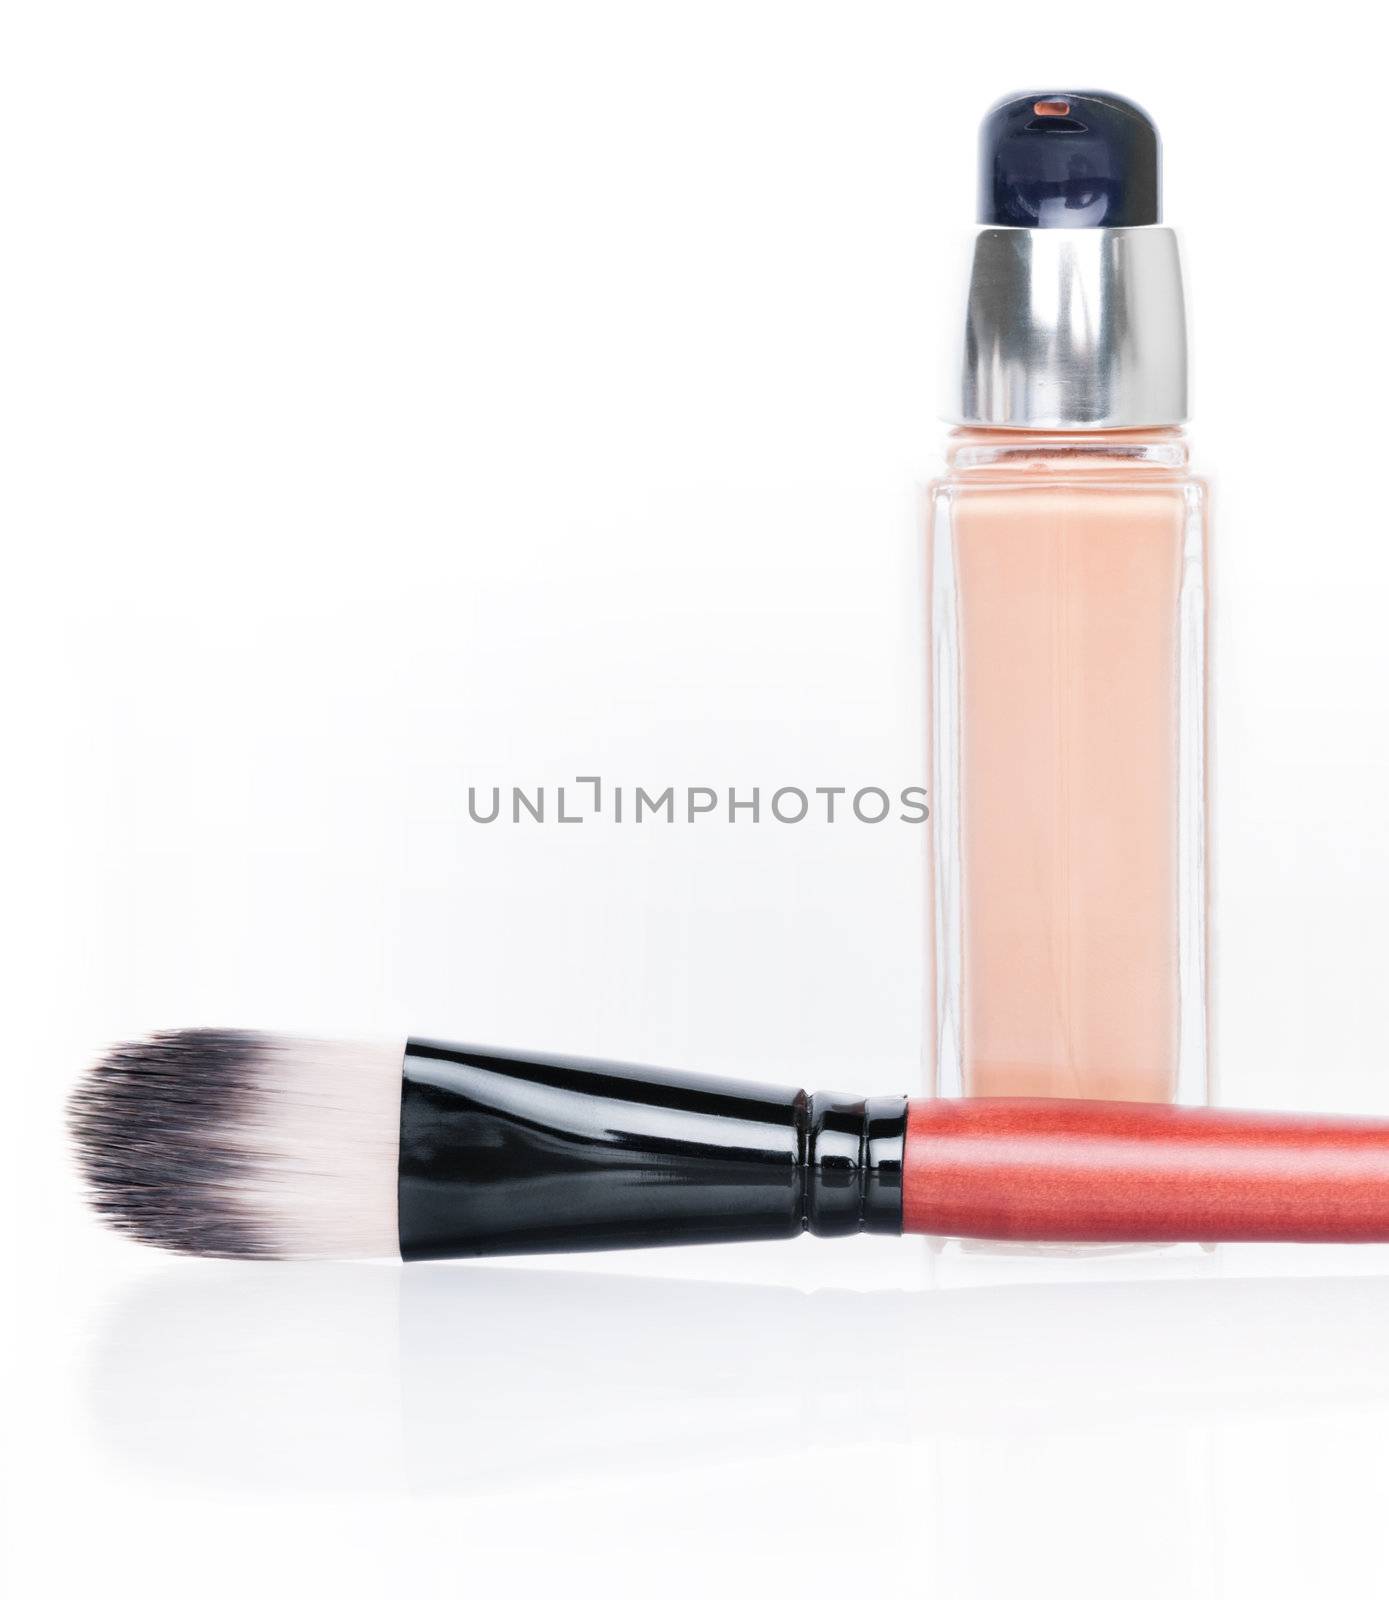 Cosmetic liquid foundation and brush on white background